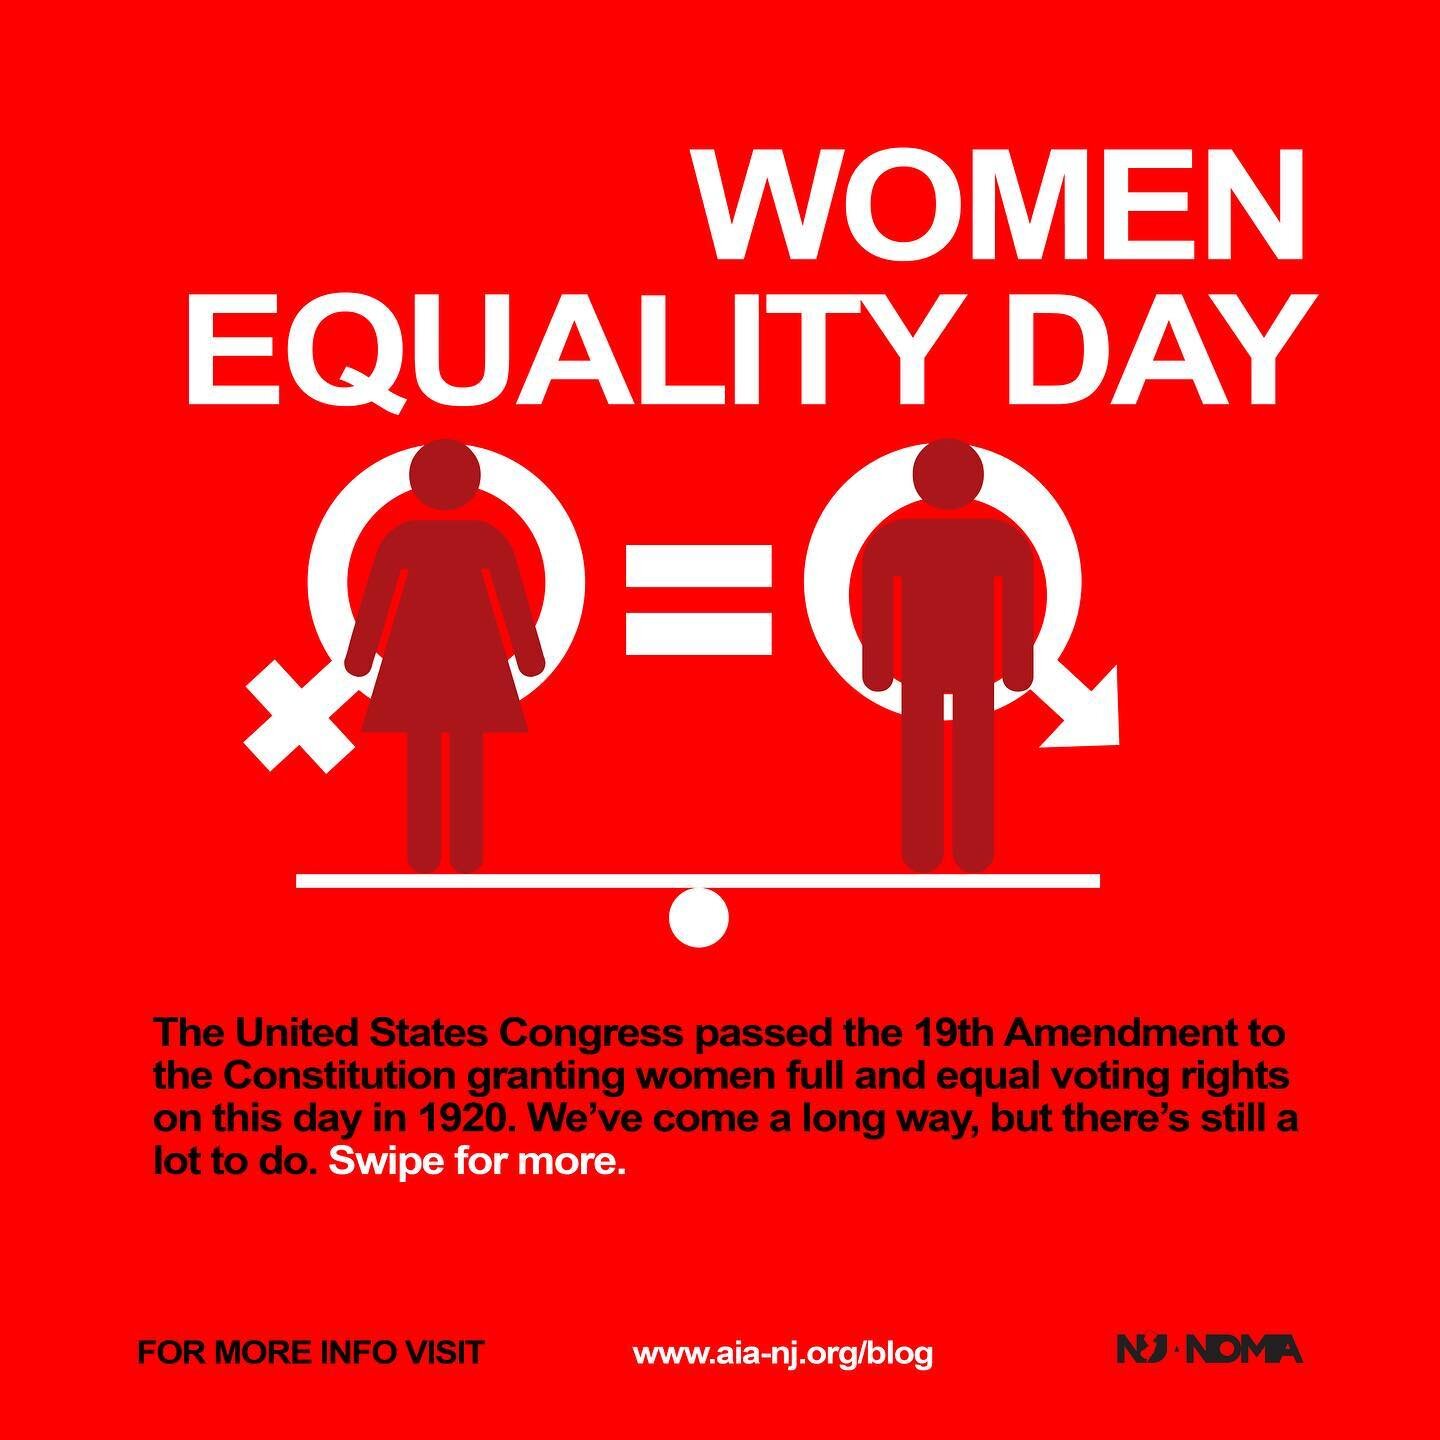 Women's Equality Day is celebrated in the US on August 26 to commemorate the 1920 adoption of the Nineteenth Amendment which prohibits the states and the federal government from denying the right to vote to citizens of the US on the basis of sex. 192